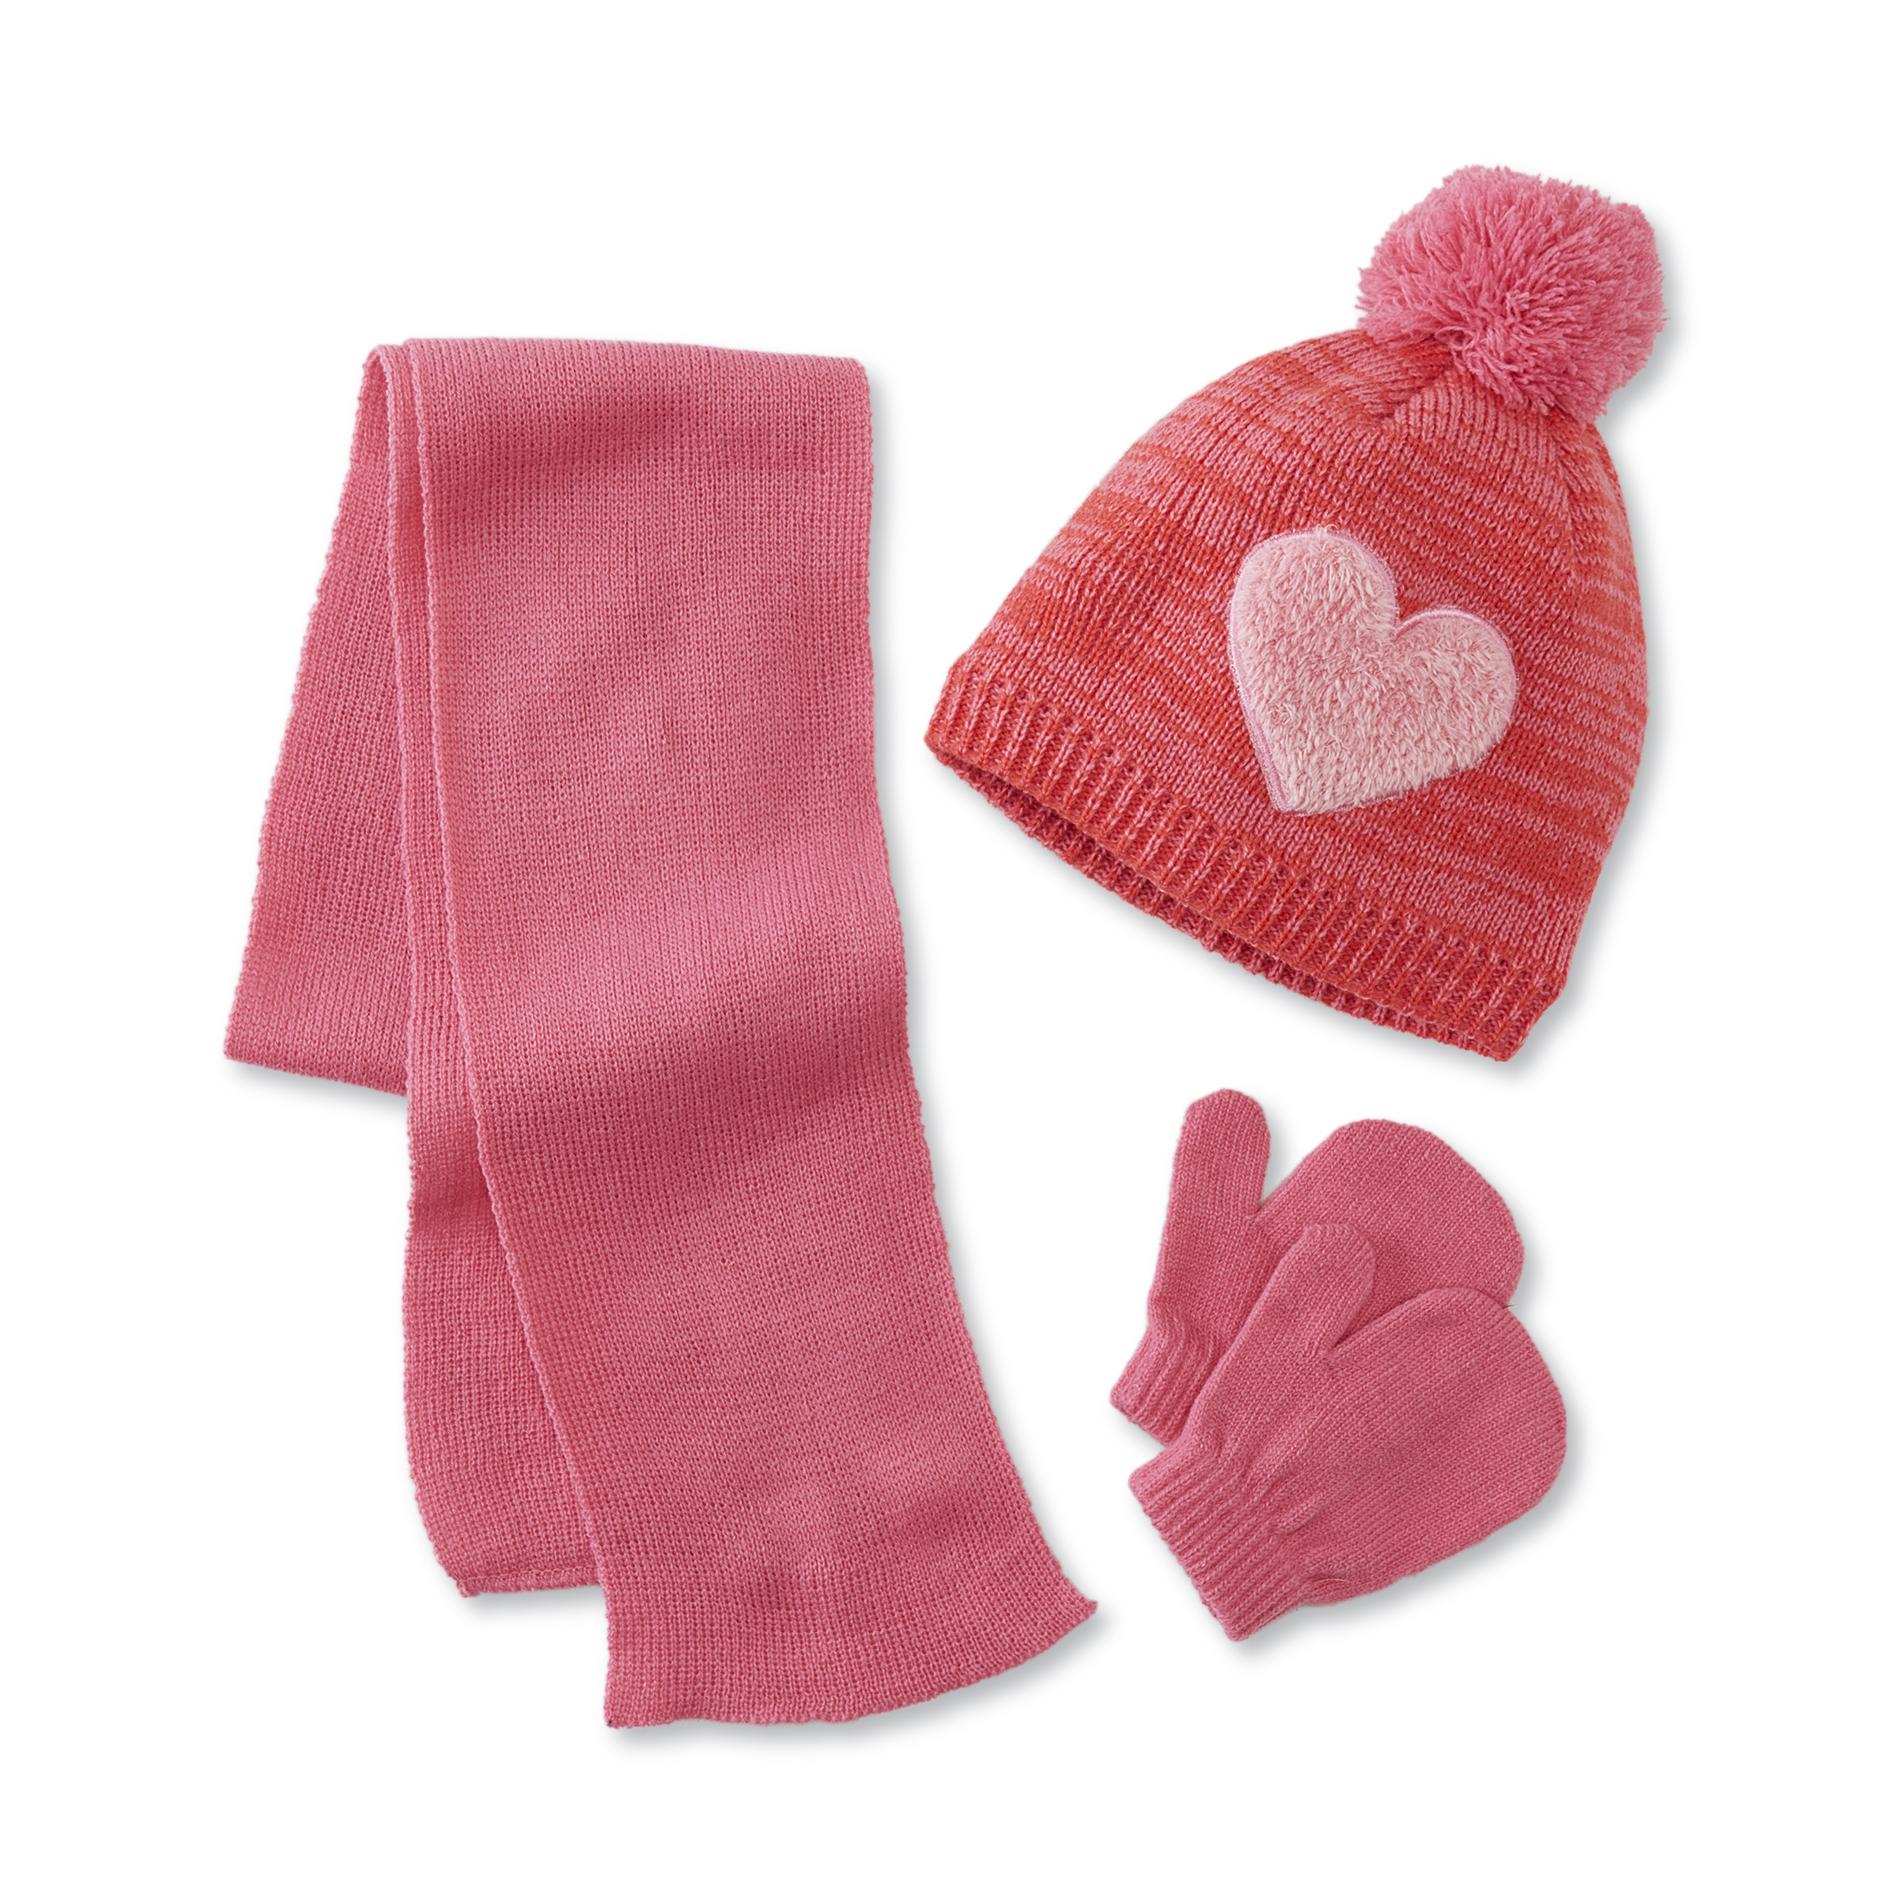 0083009005757 - GIRL'S KNIT HAT SCARF & MITTENS - HEART